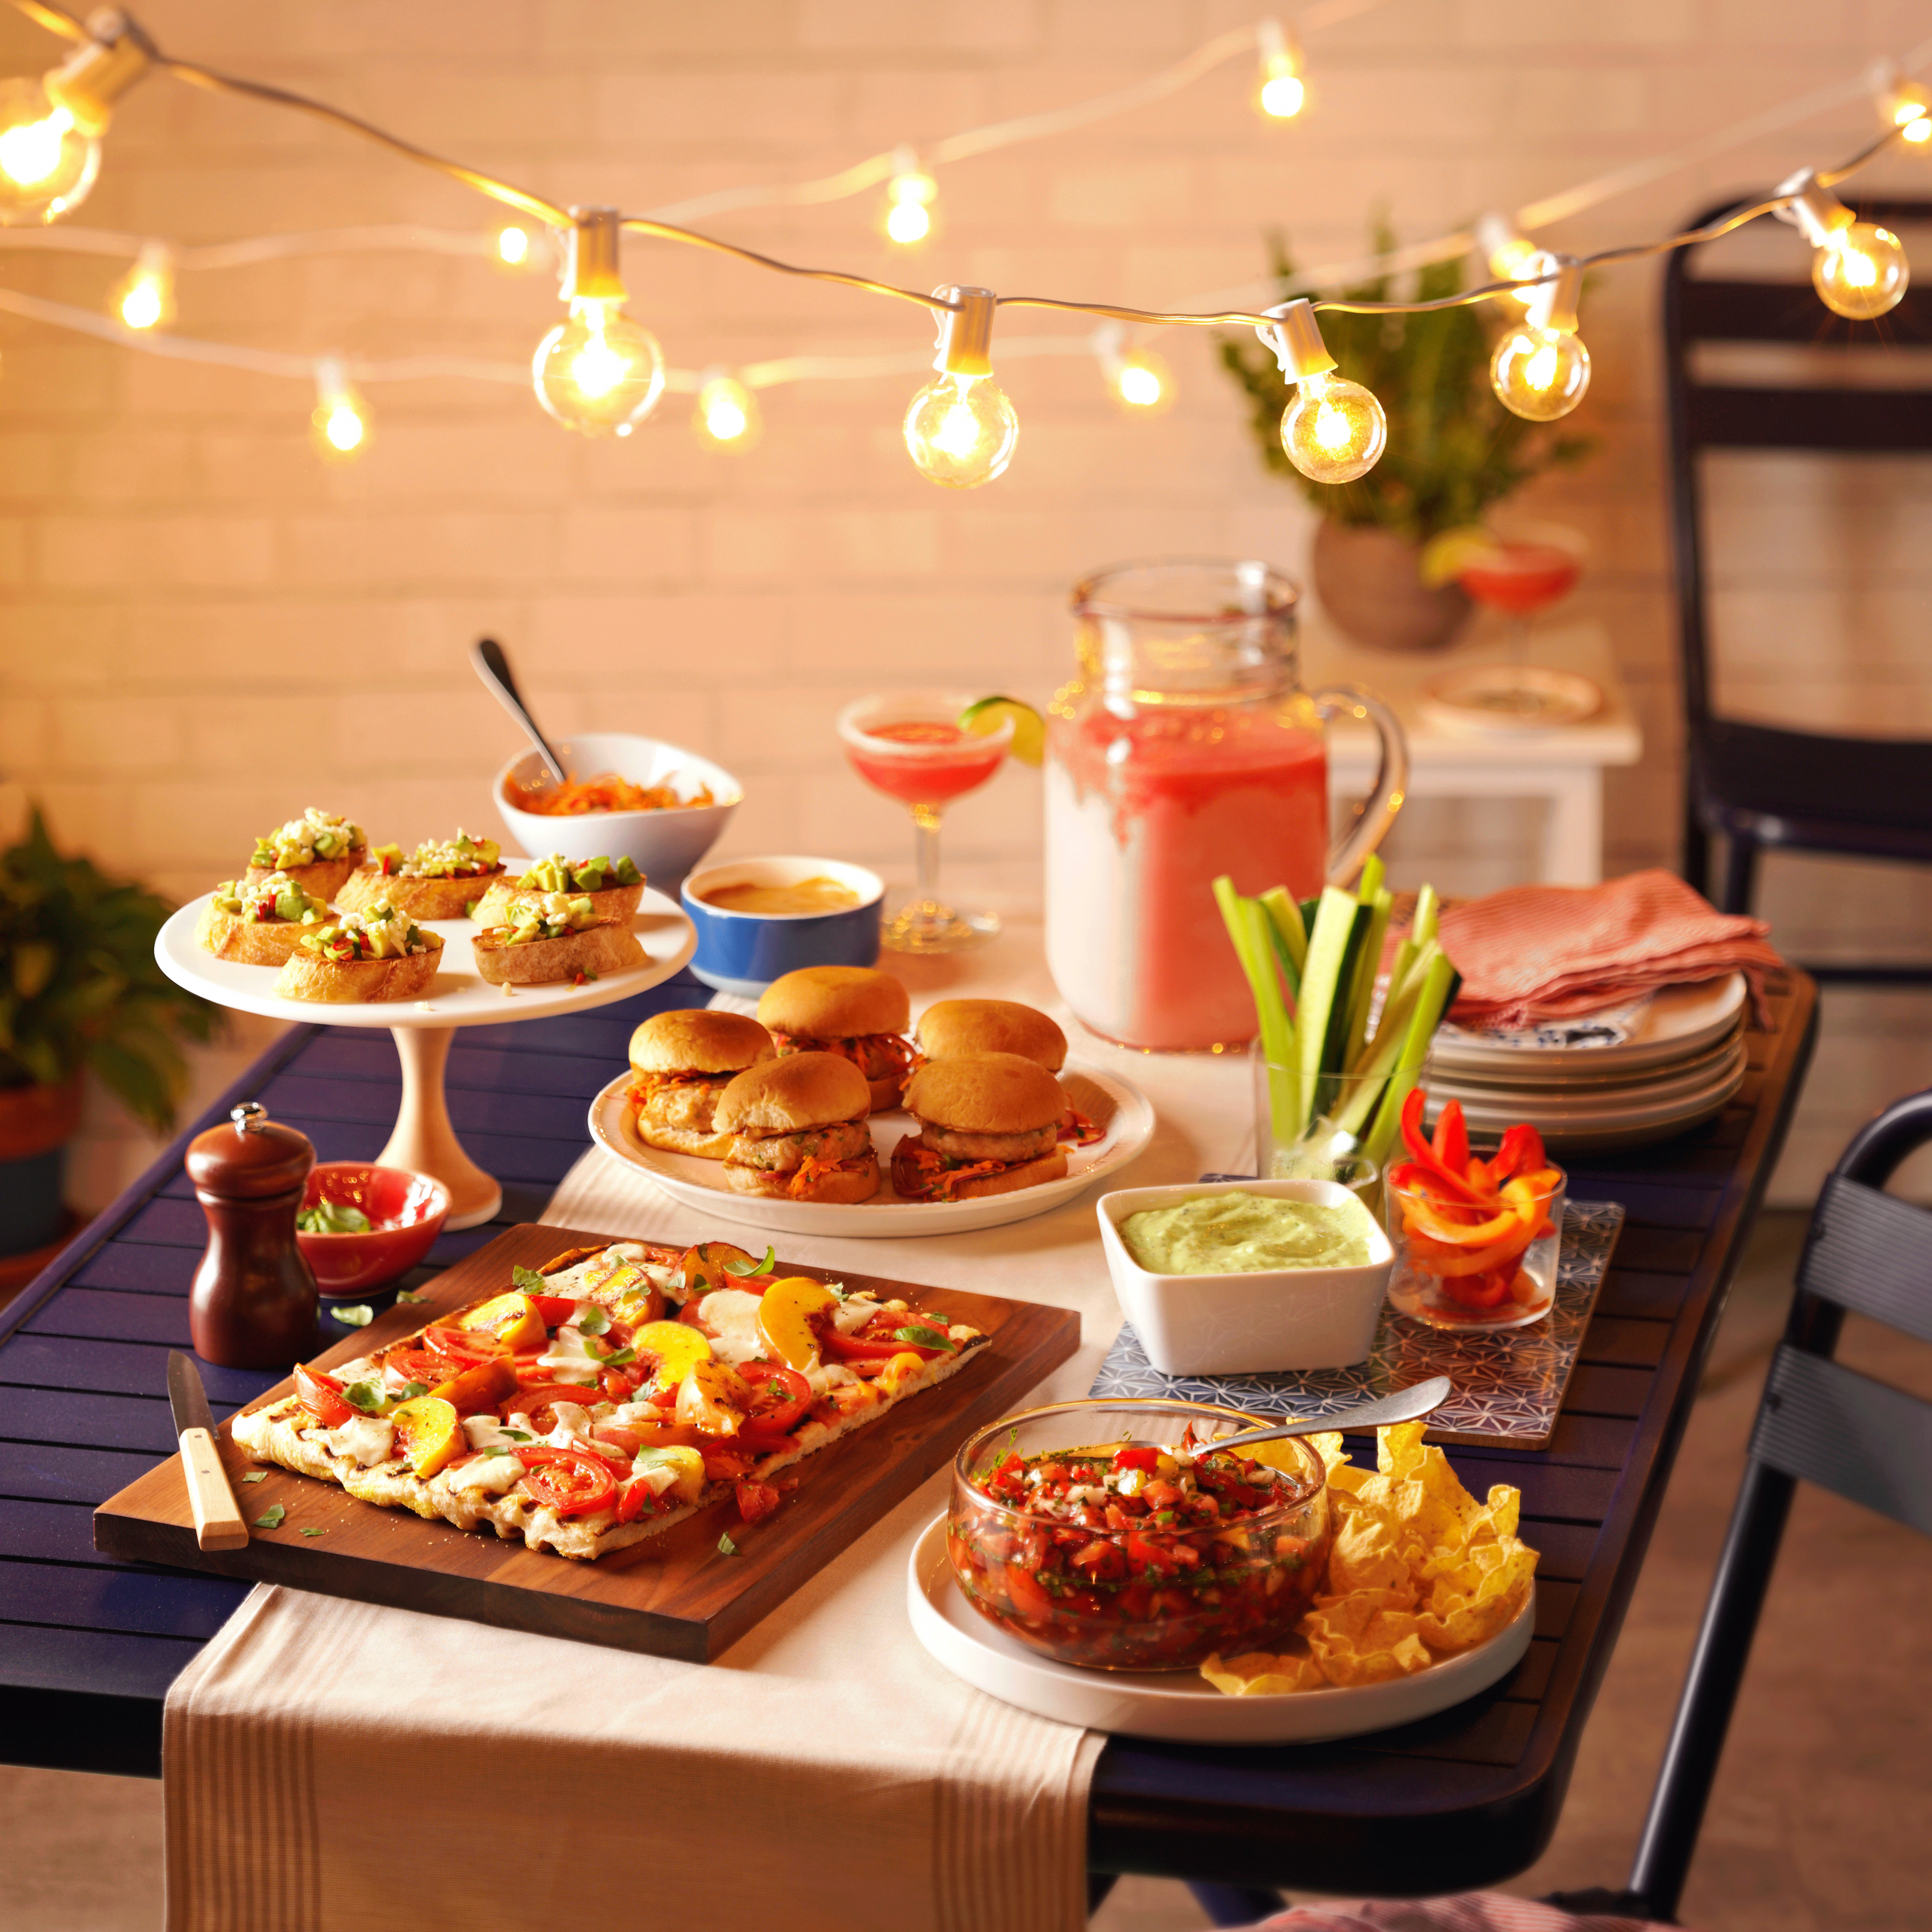 Backyard Party Food Ideas
 11 Insanely Smart Ideas for Your Backyard Party